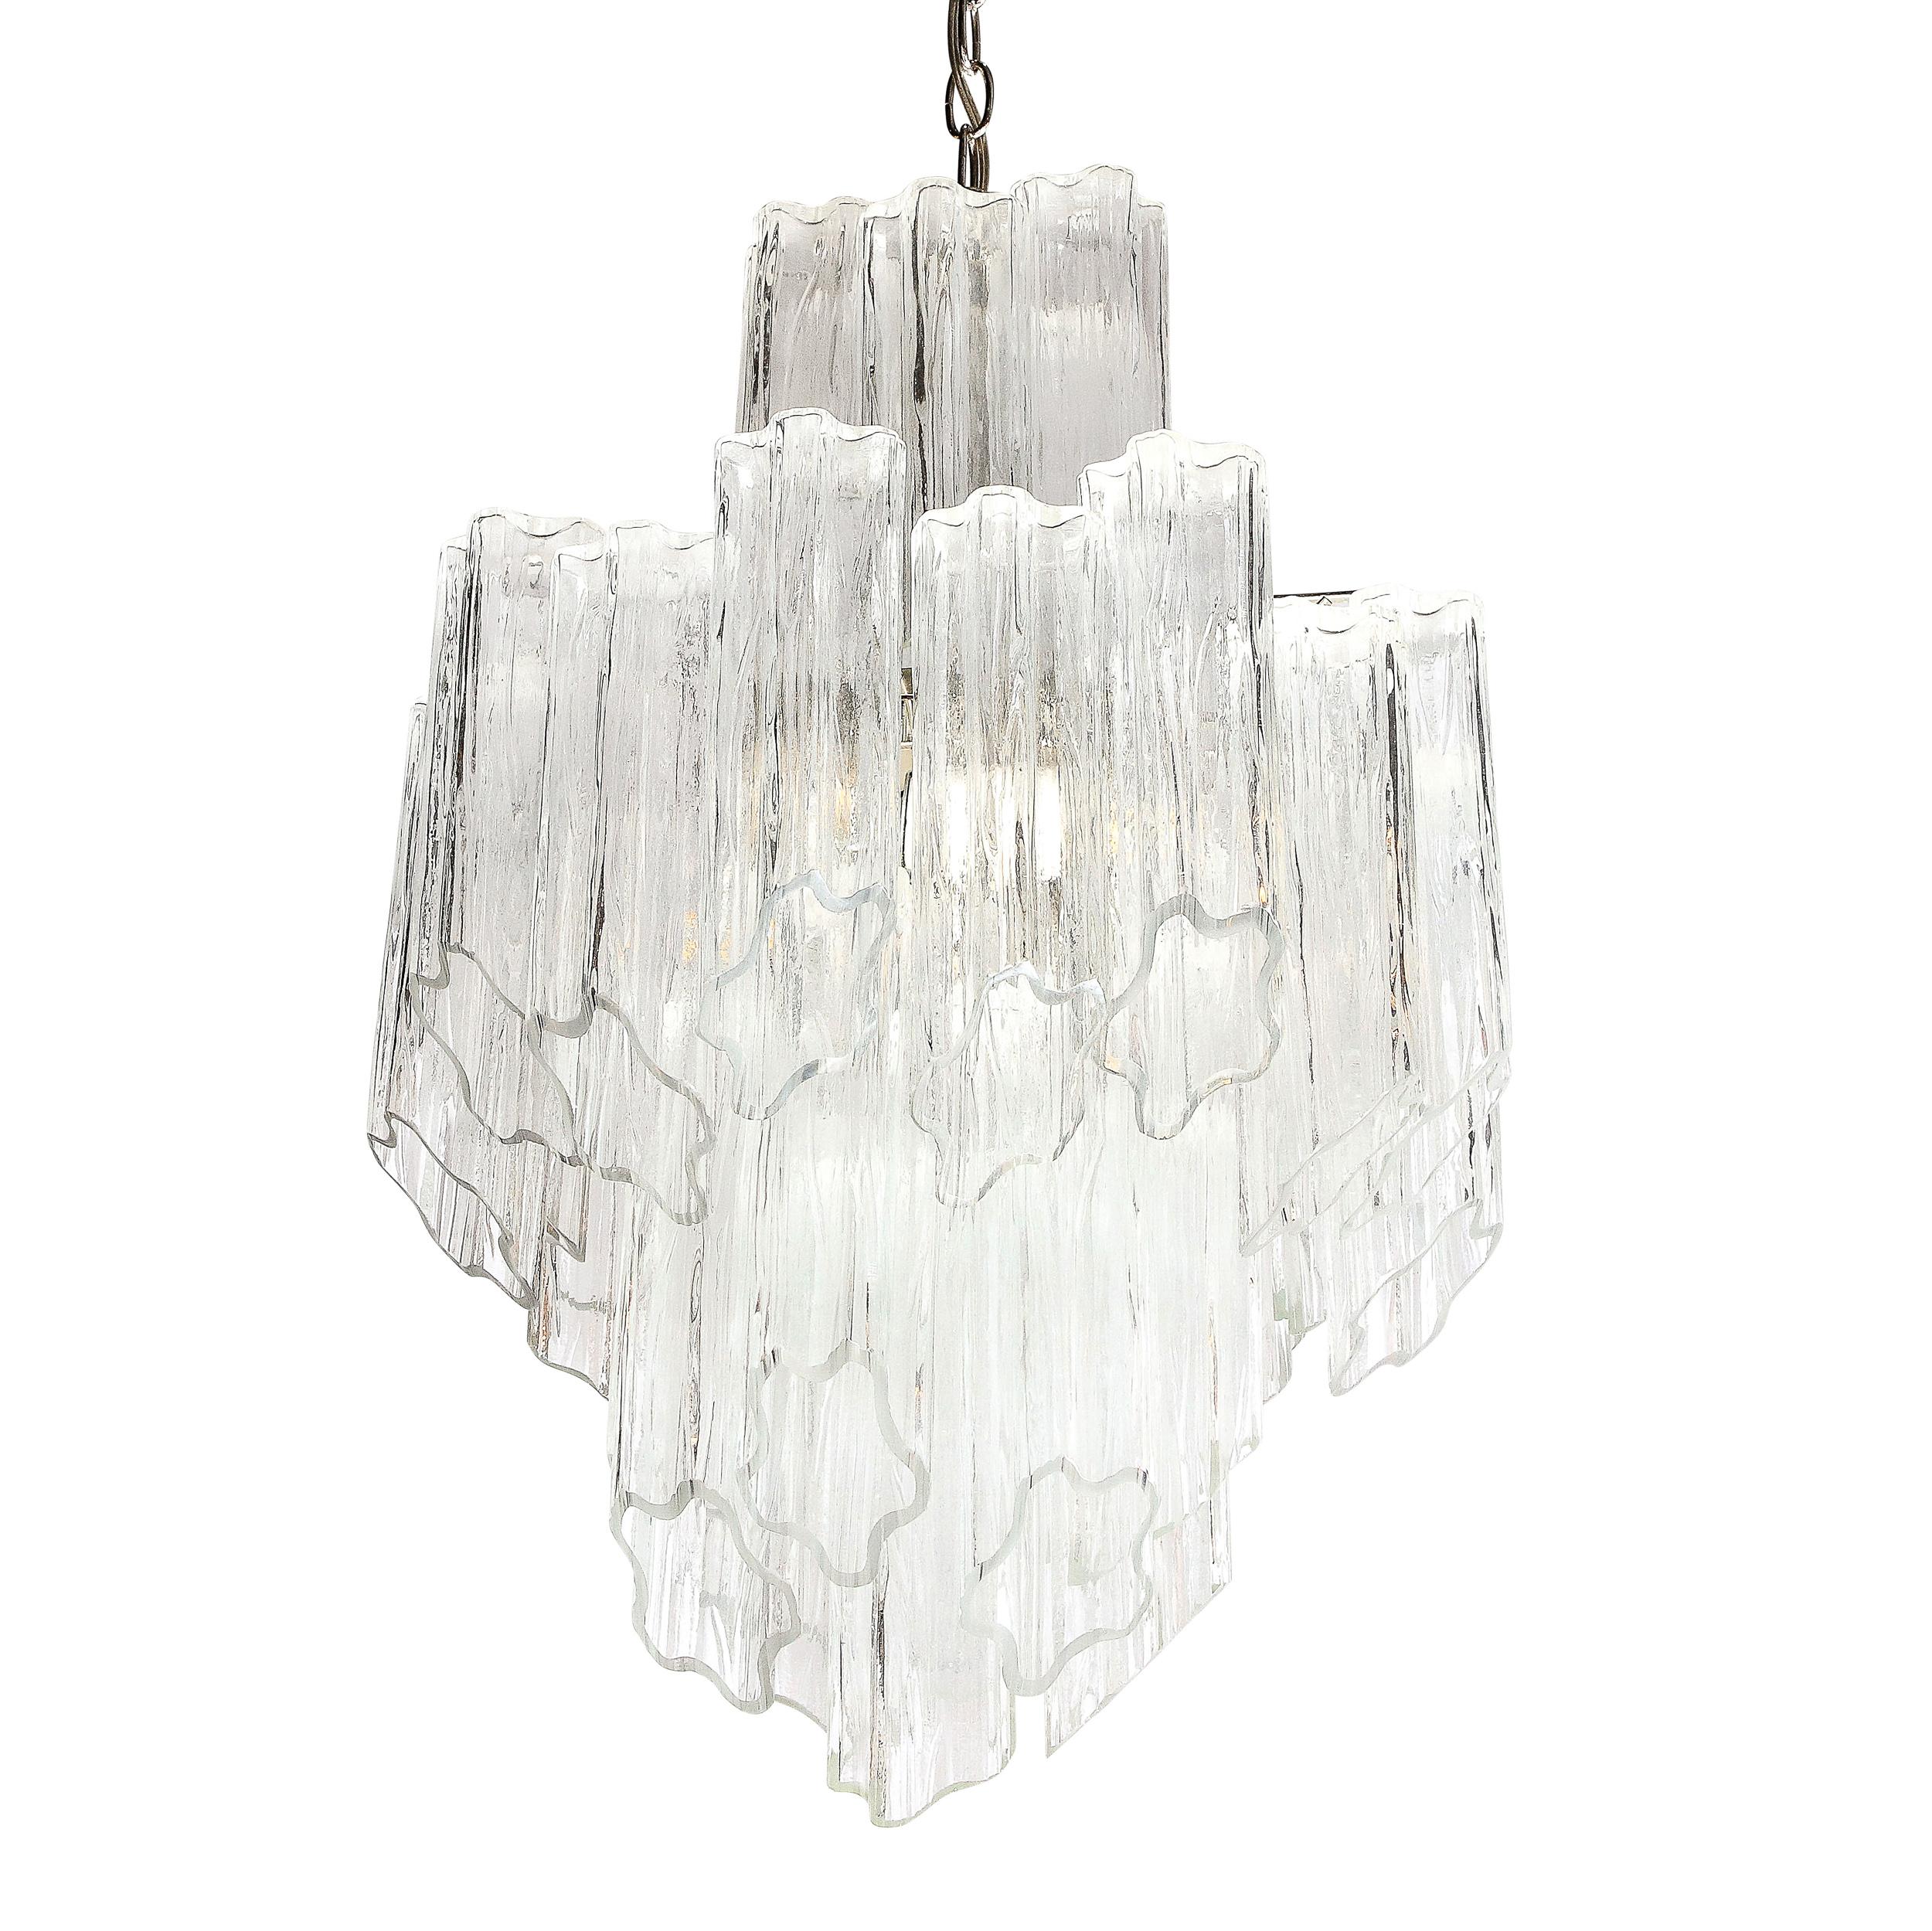 This sophisticated and graphic Mid-Century Modern chandelier was realized in Murano, Italy- the island off the coast of Murano renowned for centuries for its superlative glass production- circa 1970. It features three stacked layers of handblown